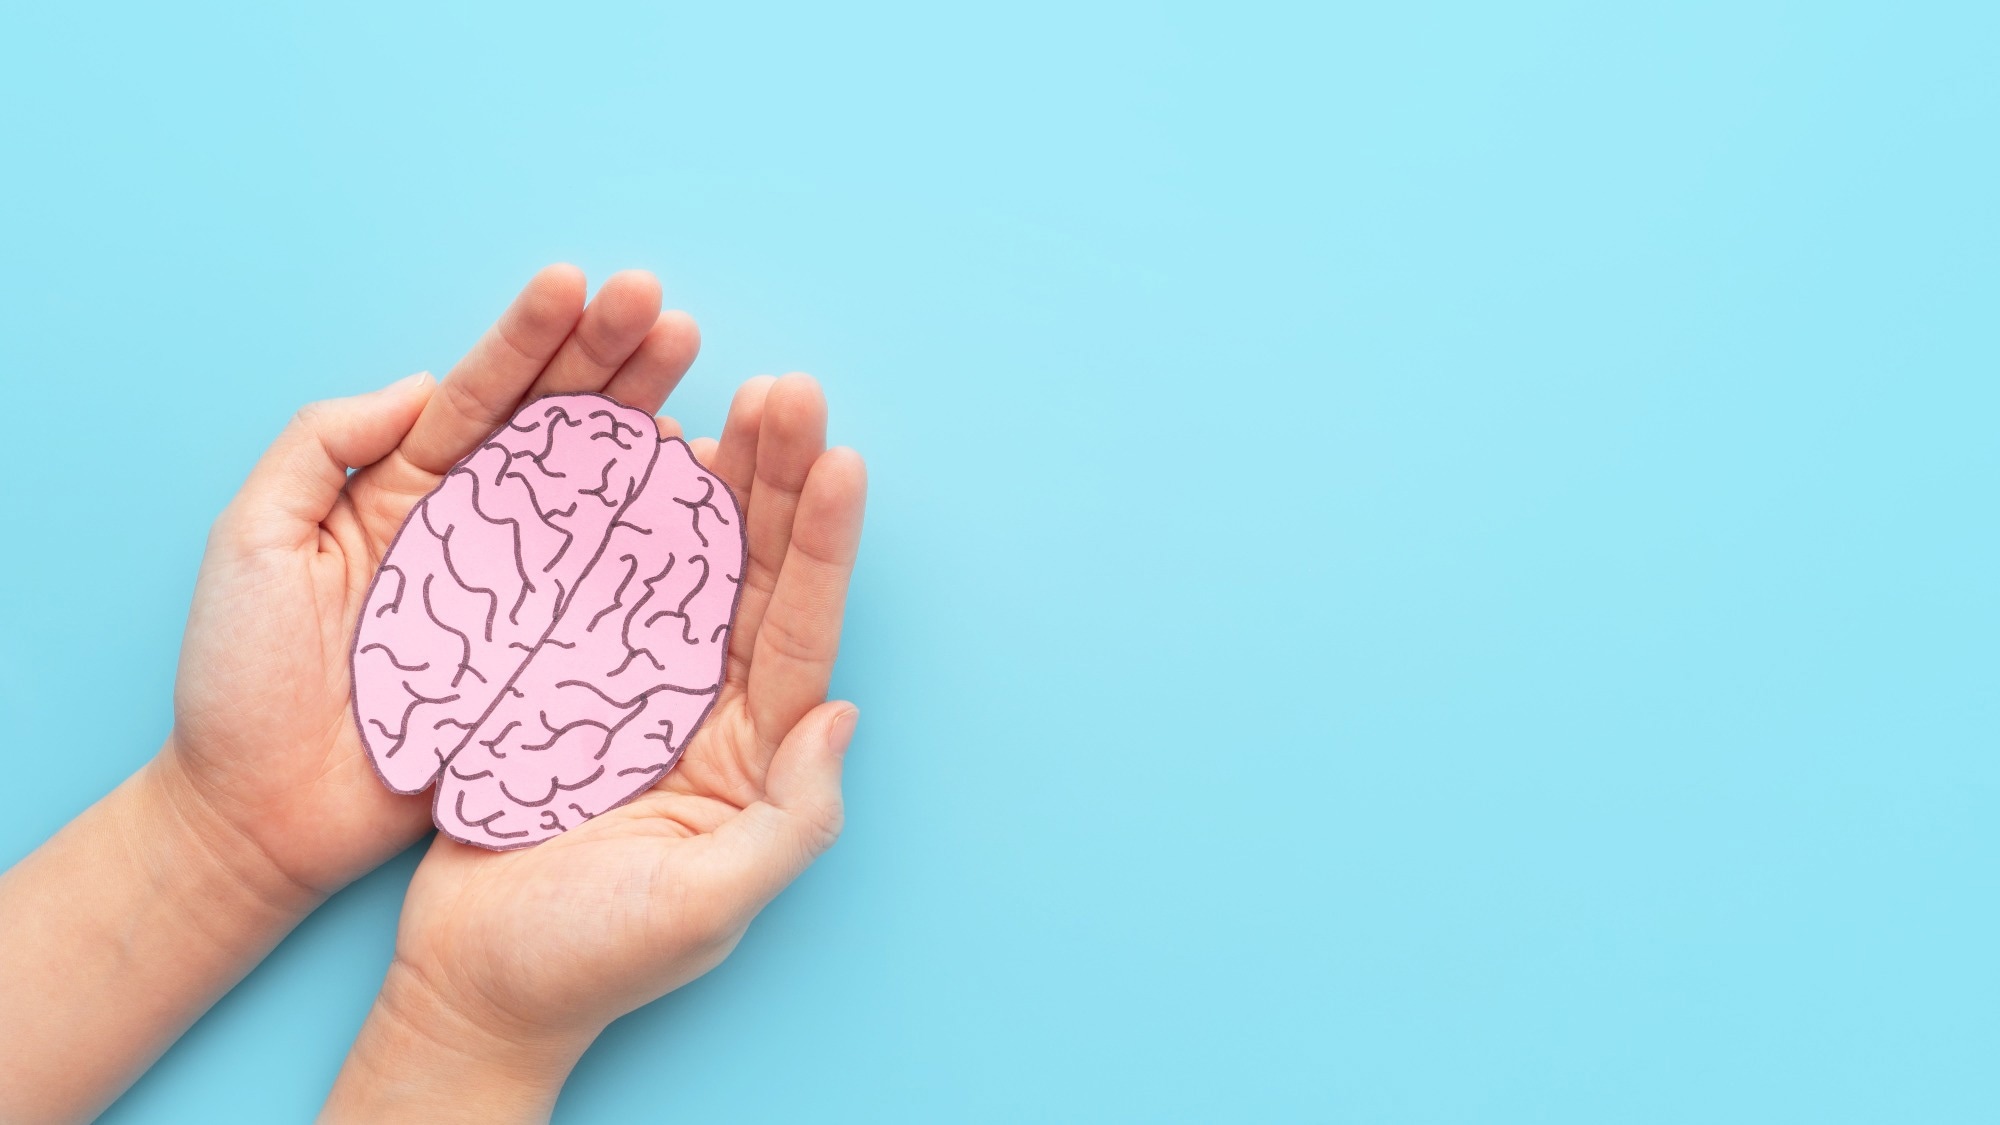 Study: Patterns of Regional Brain Atrophy and Brain Aging in Middle- and Older-Aged Adults With Type 1 Diabetes. Image Credit: OrawanPattarawimonchai/Shutterstock.com